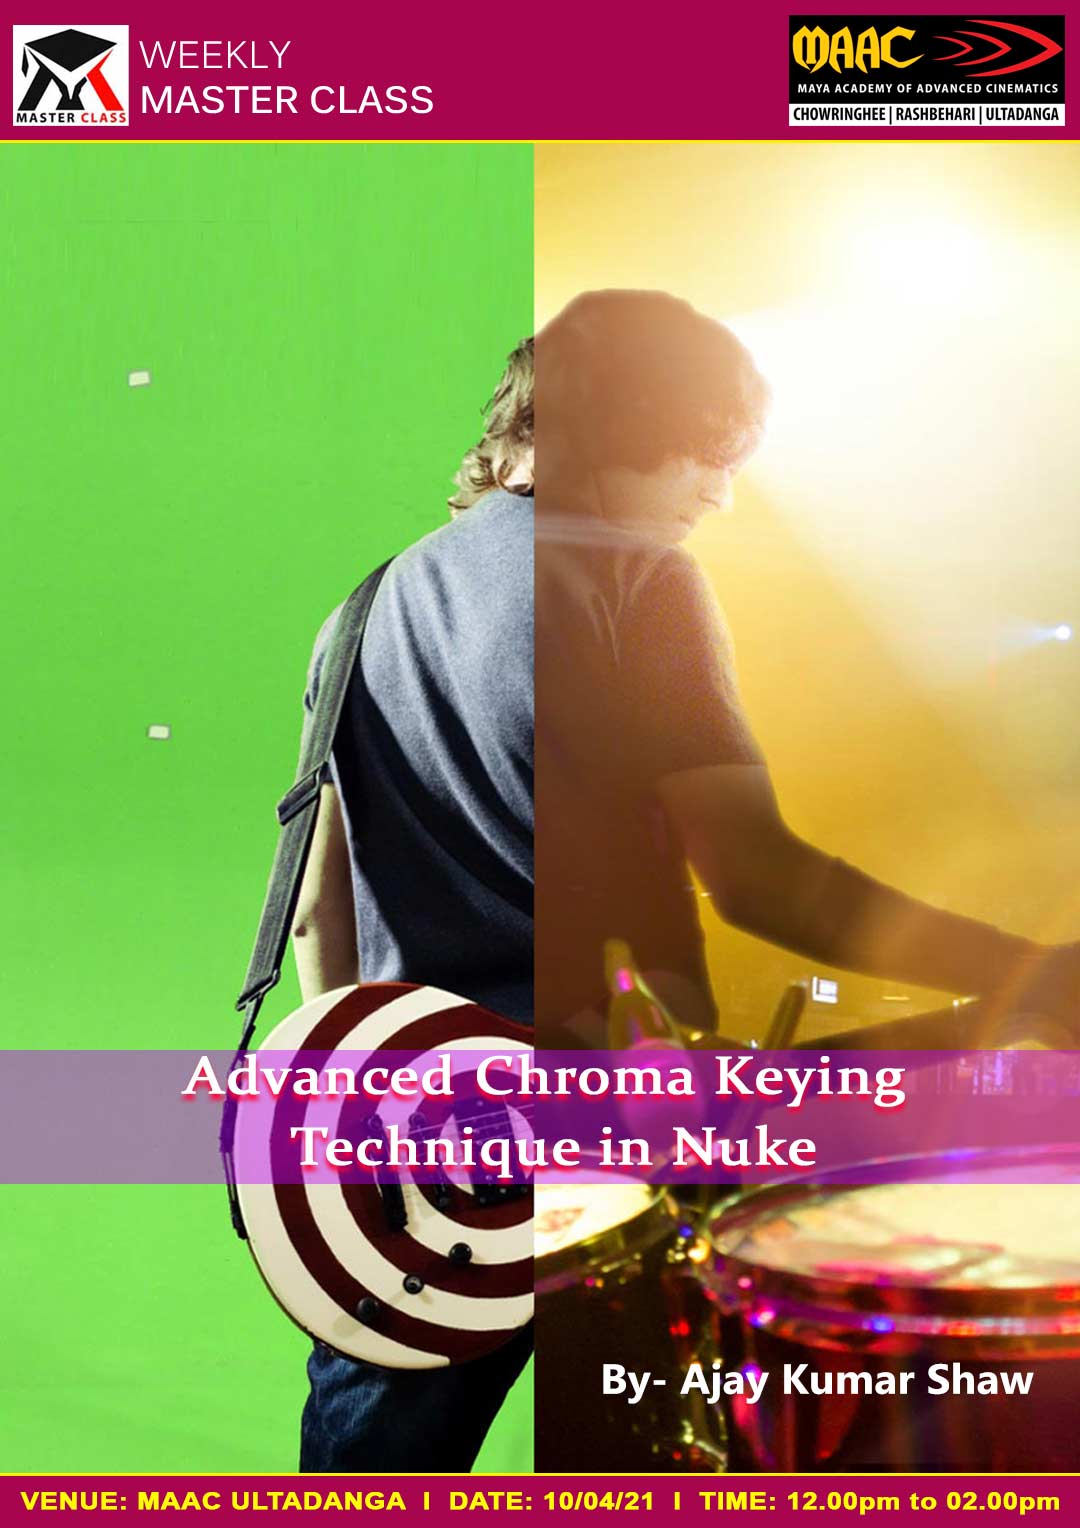 Weekly Master Class on Advanced Chroma Keying Technique in Nuke